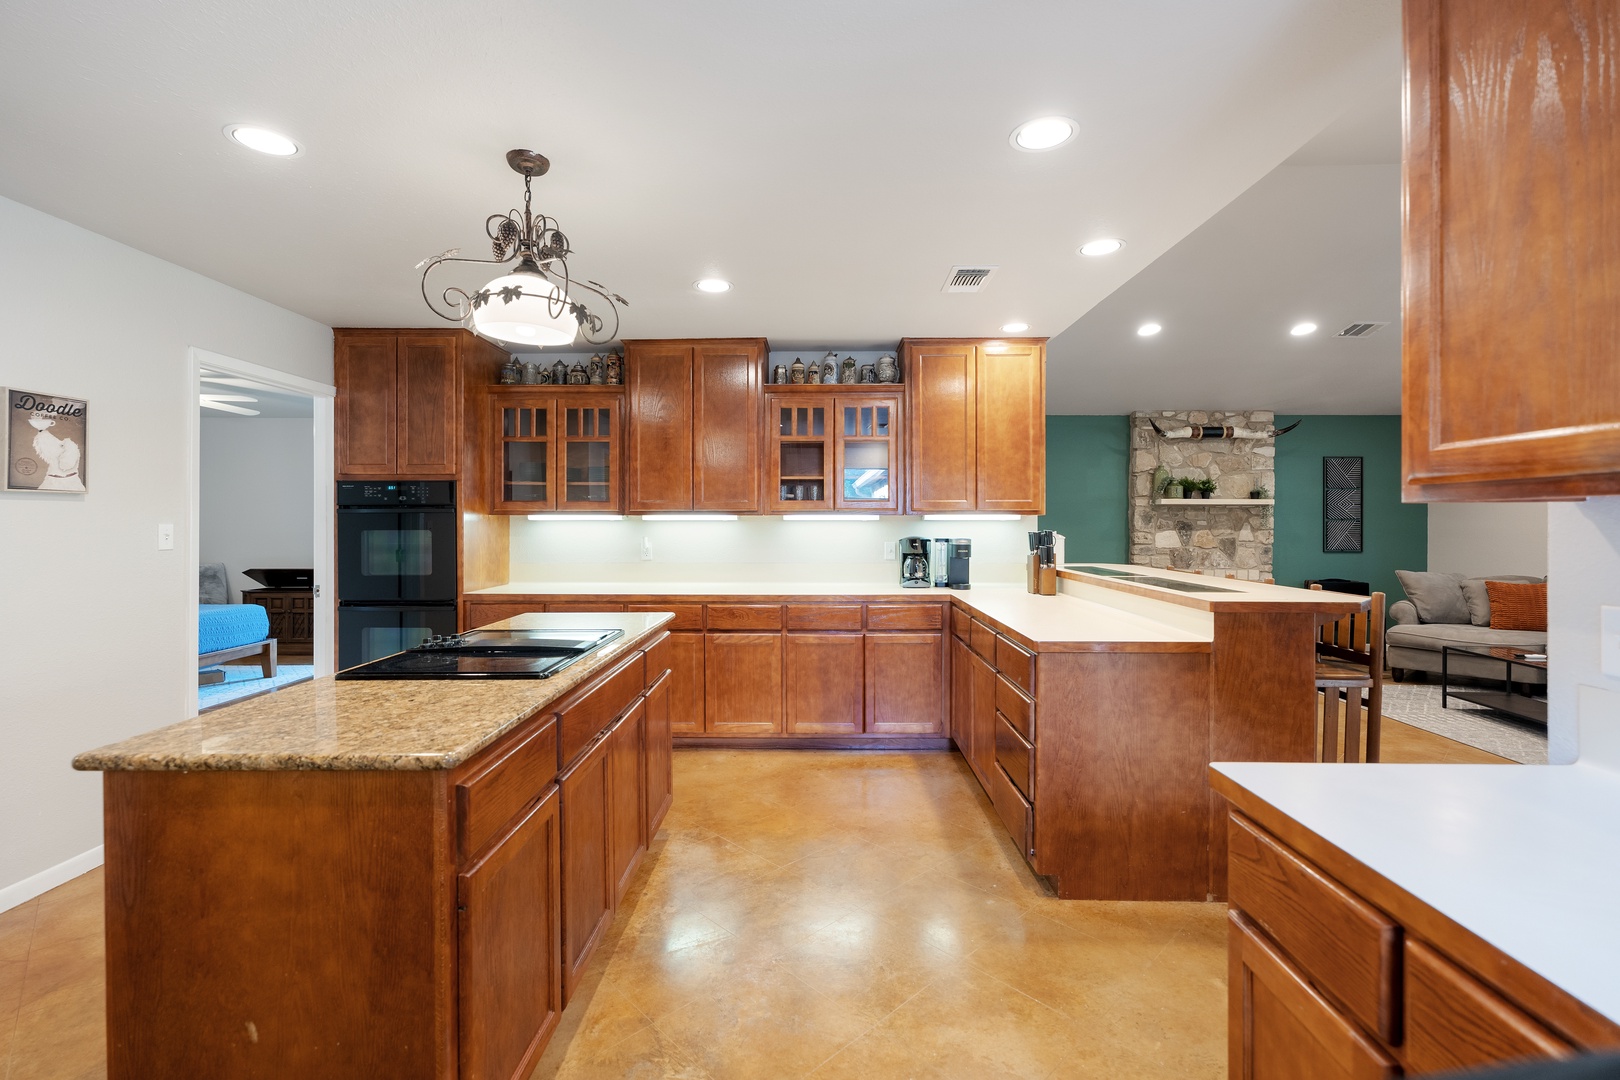 The kitchen is spacious and open, with all the comforts of home